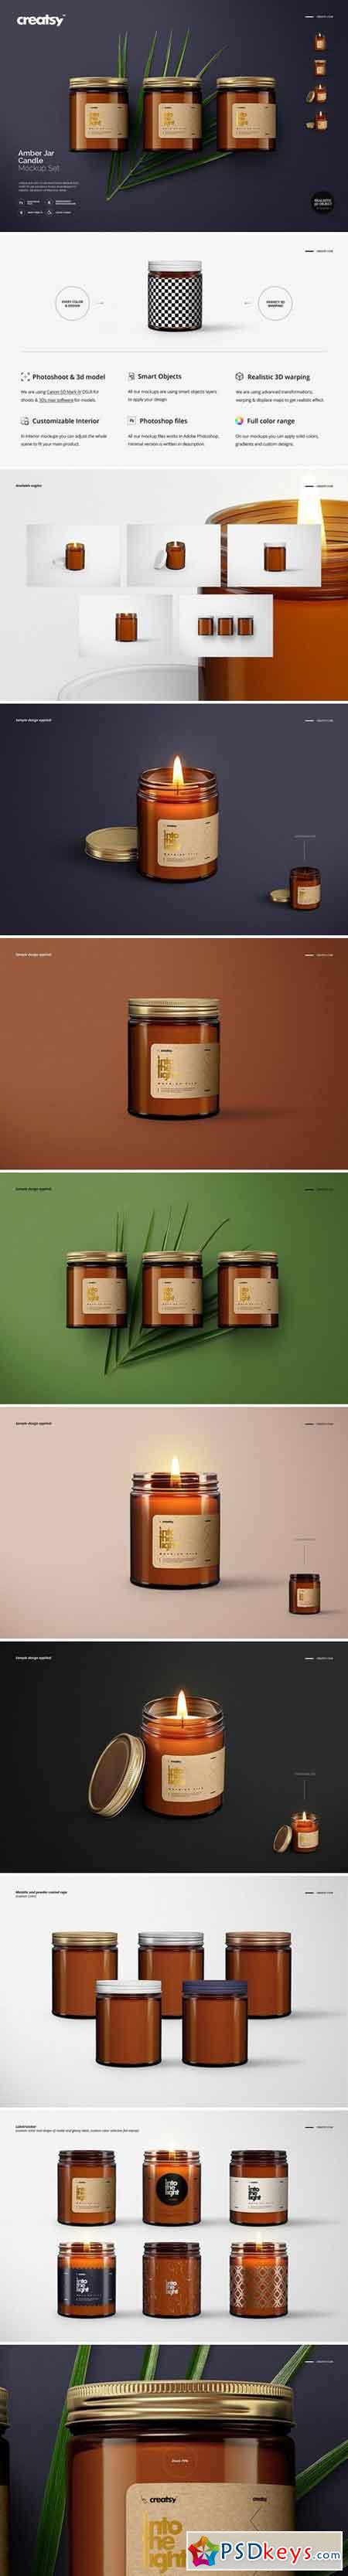 Download jar » page 3 » Free Download Photoshop Vector Stock image ...